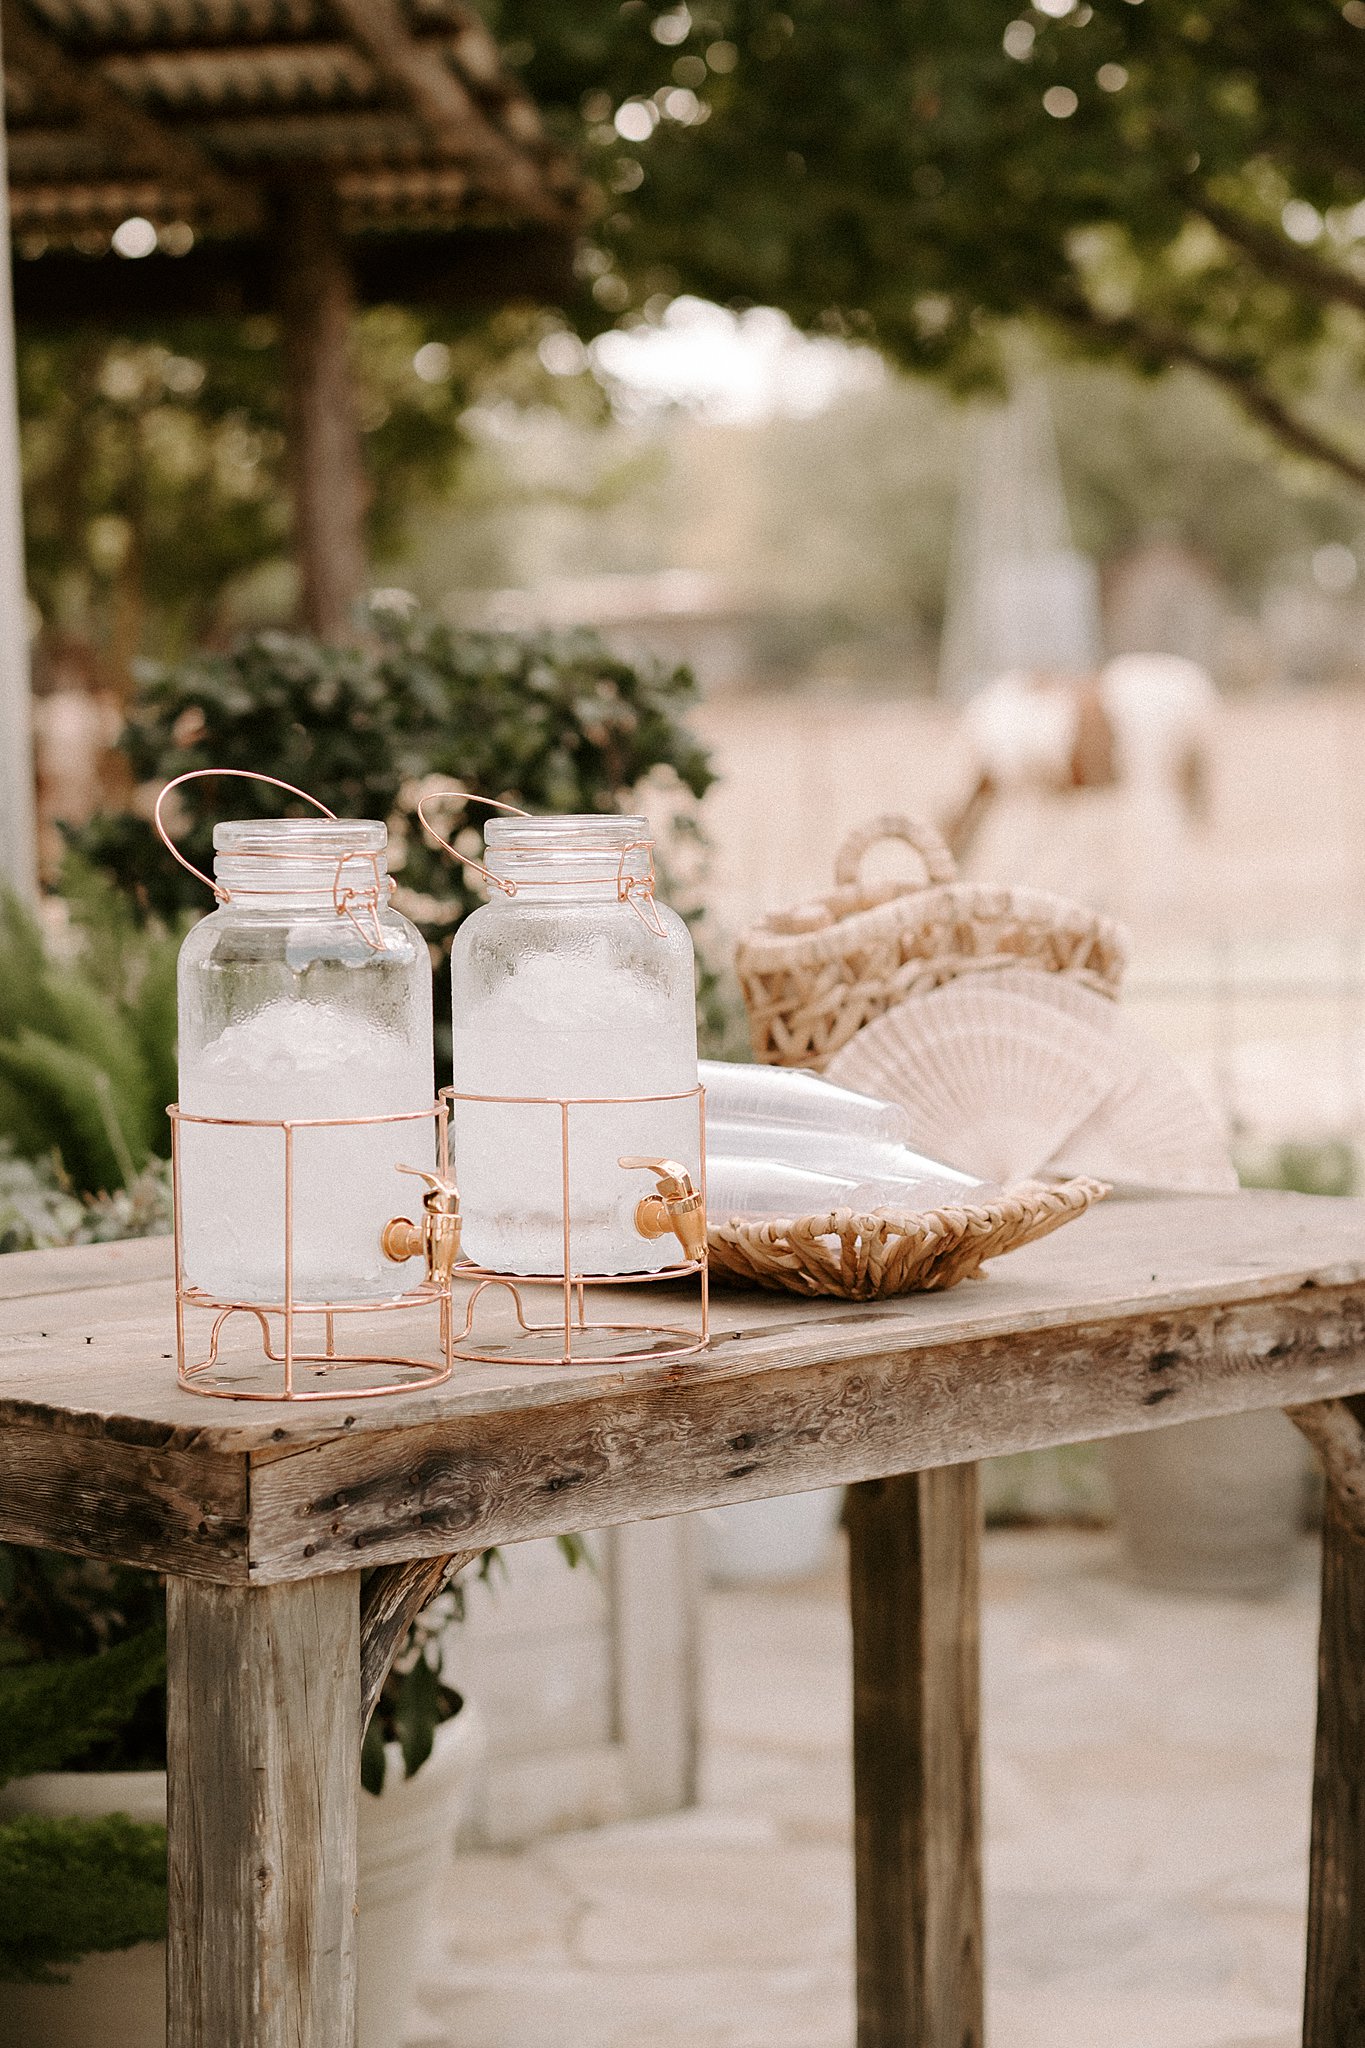 A couple's mistakes when planning their wedding become evident as they set two jars of water on a wooden table.